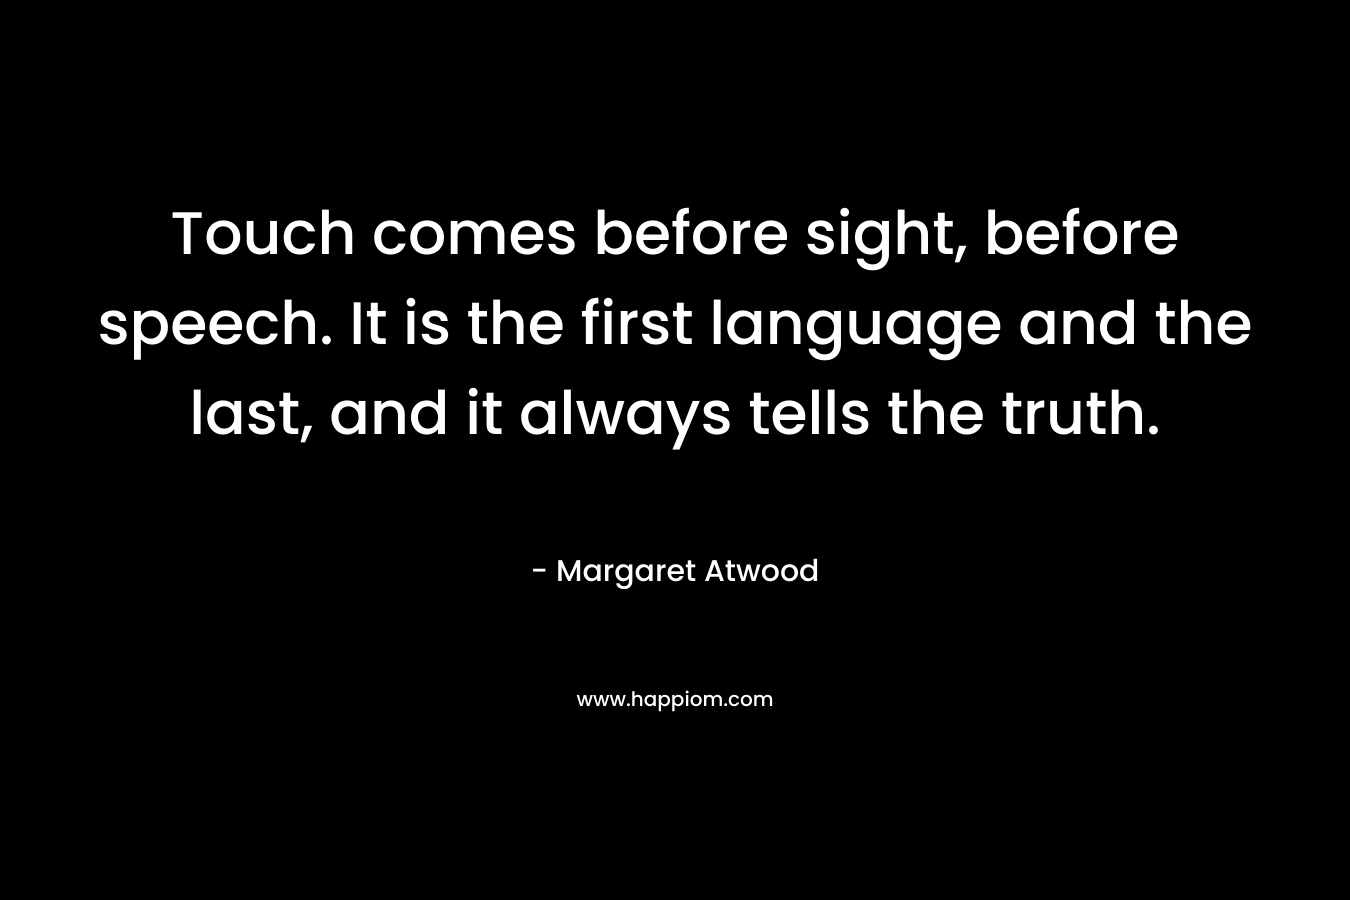 Touch comes before sight, before speech. It is the first language and the last, and it always tells the truth.